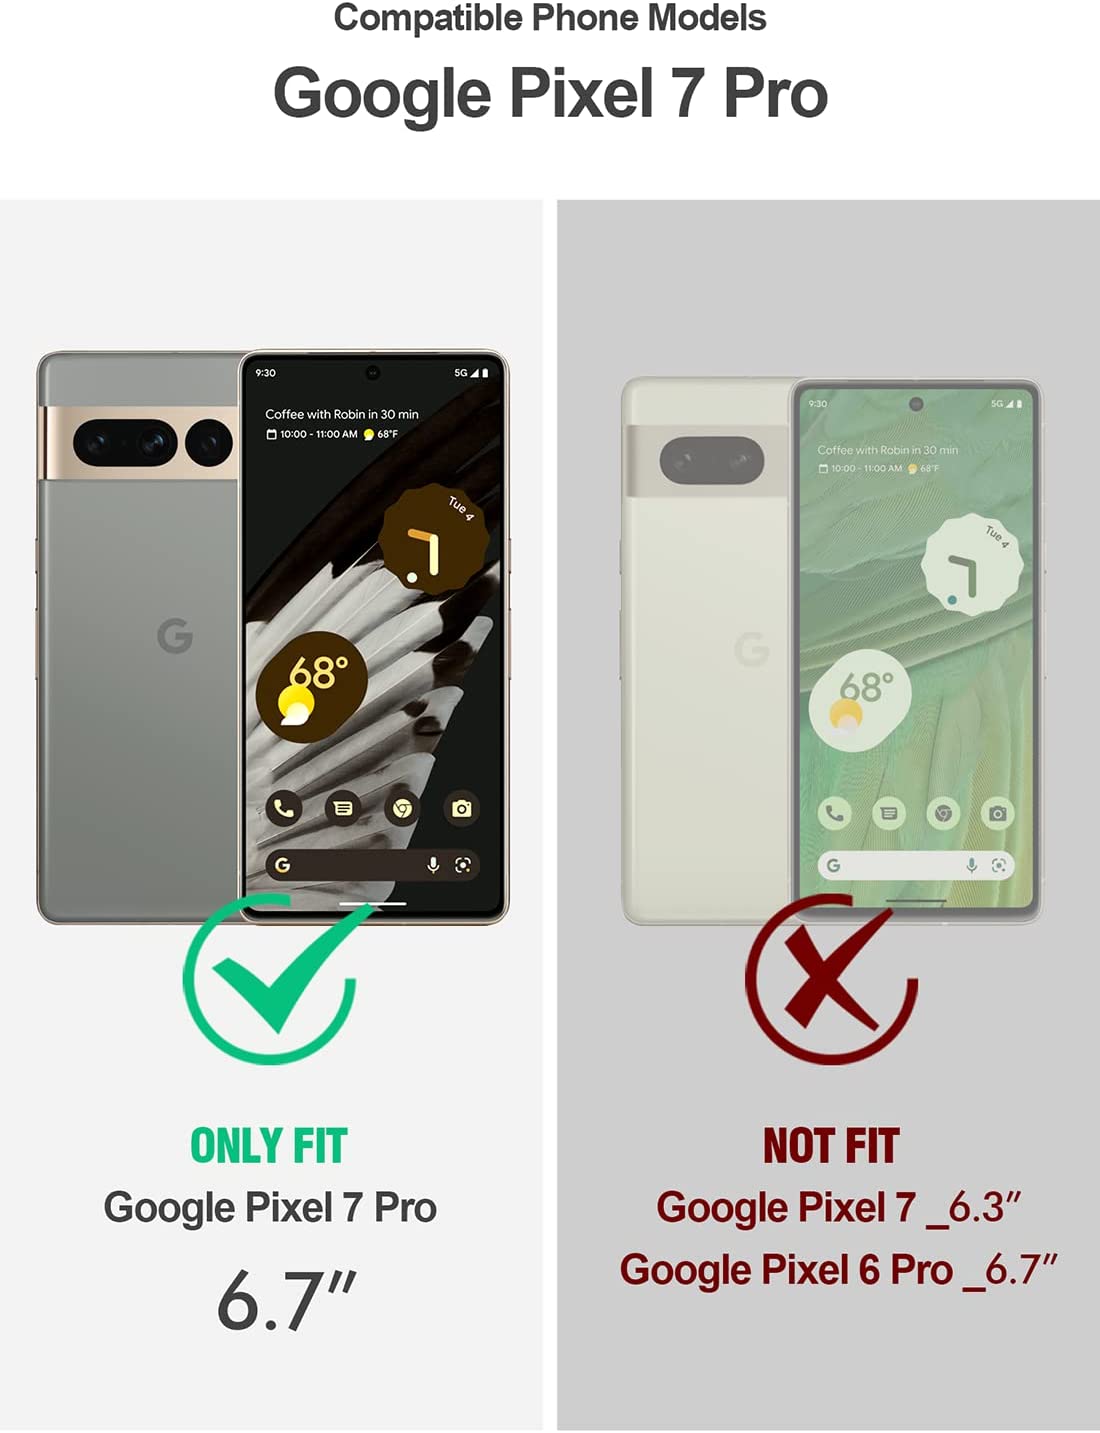 For Google Pixel 7A Clear Case Google Pixel 7A 7 Pro Cover Coque Funda  Sehll Hard